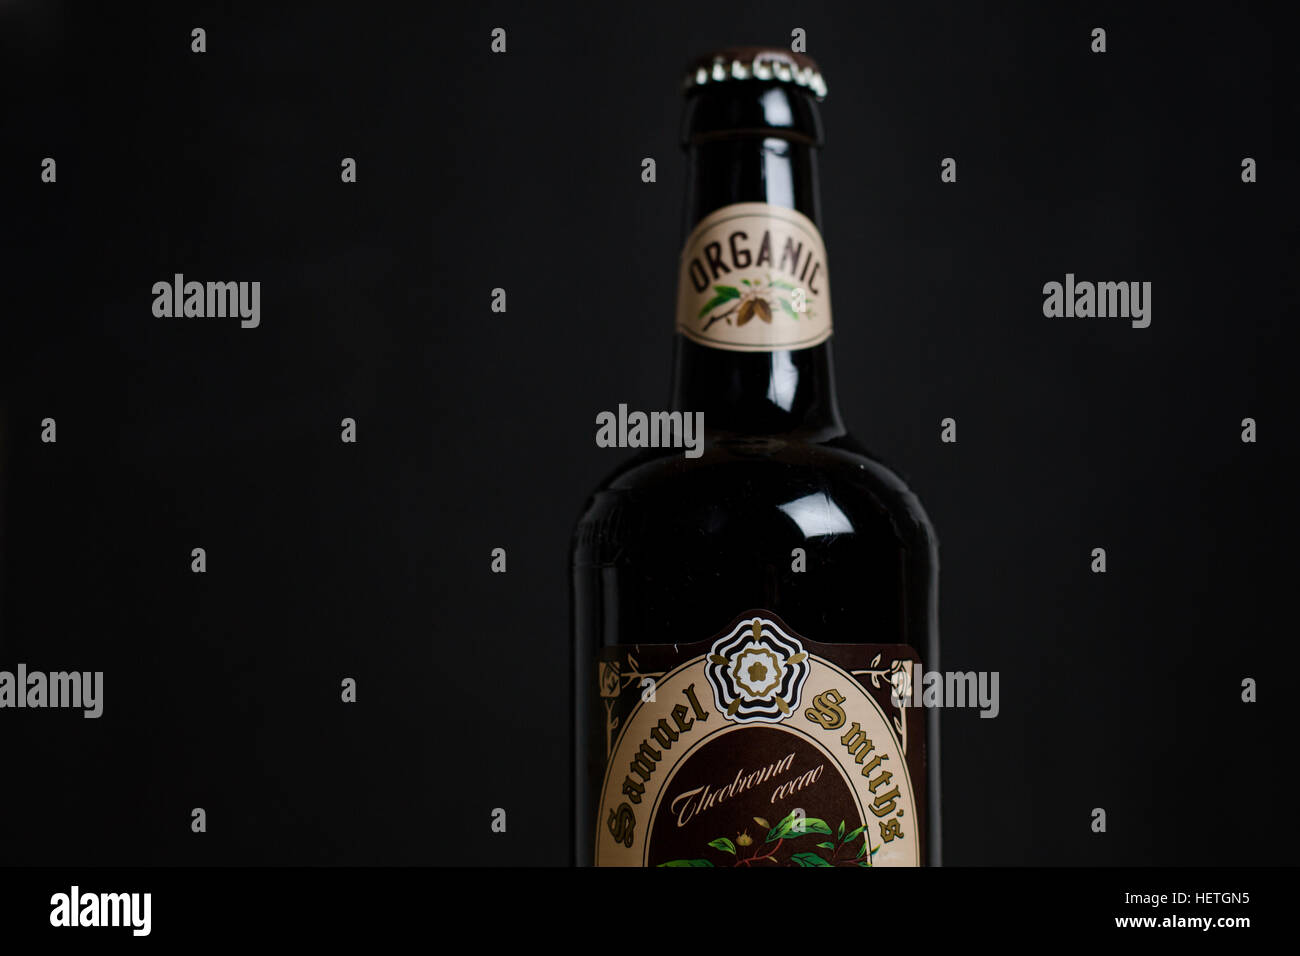 Bottle of the Sam Smiths Organic Chocolate stout brewed in tadcaster yorkshire Stock Photo